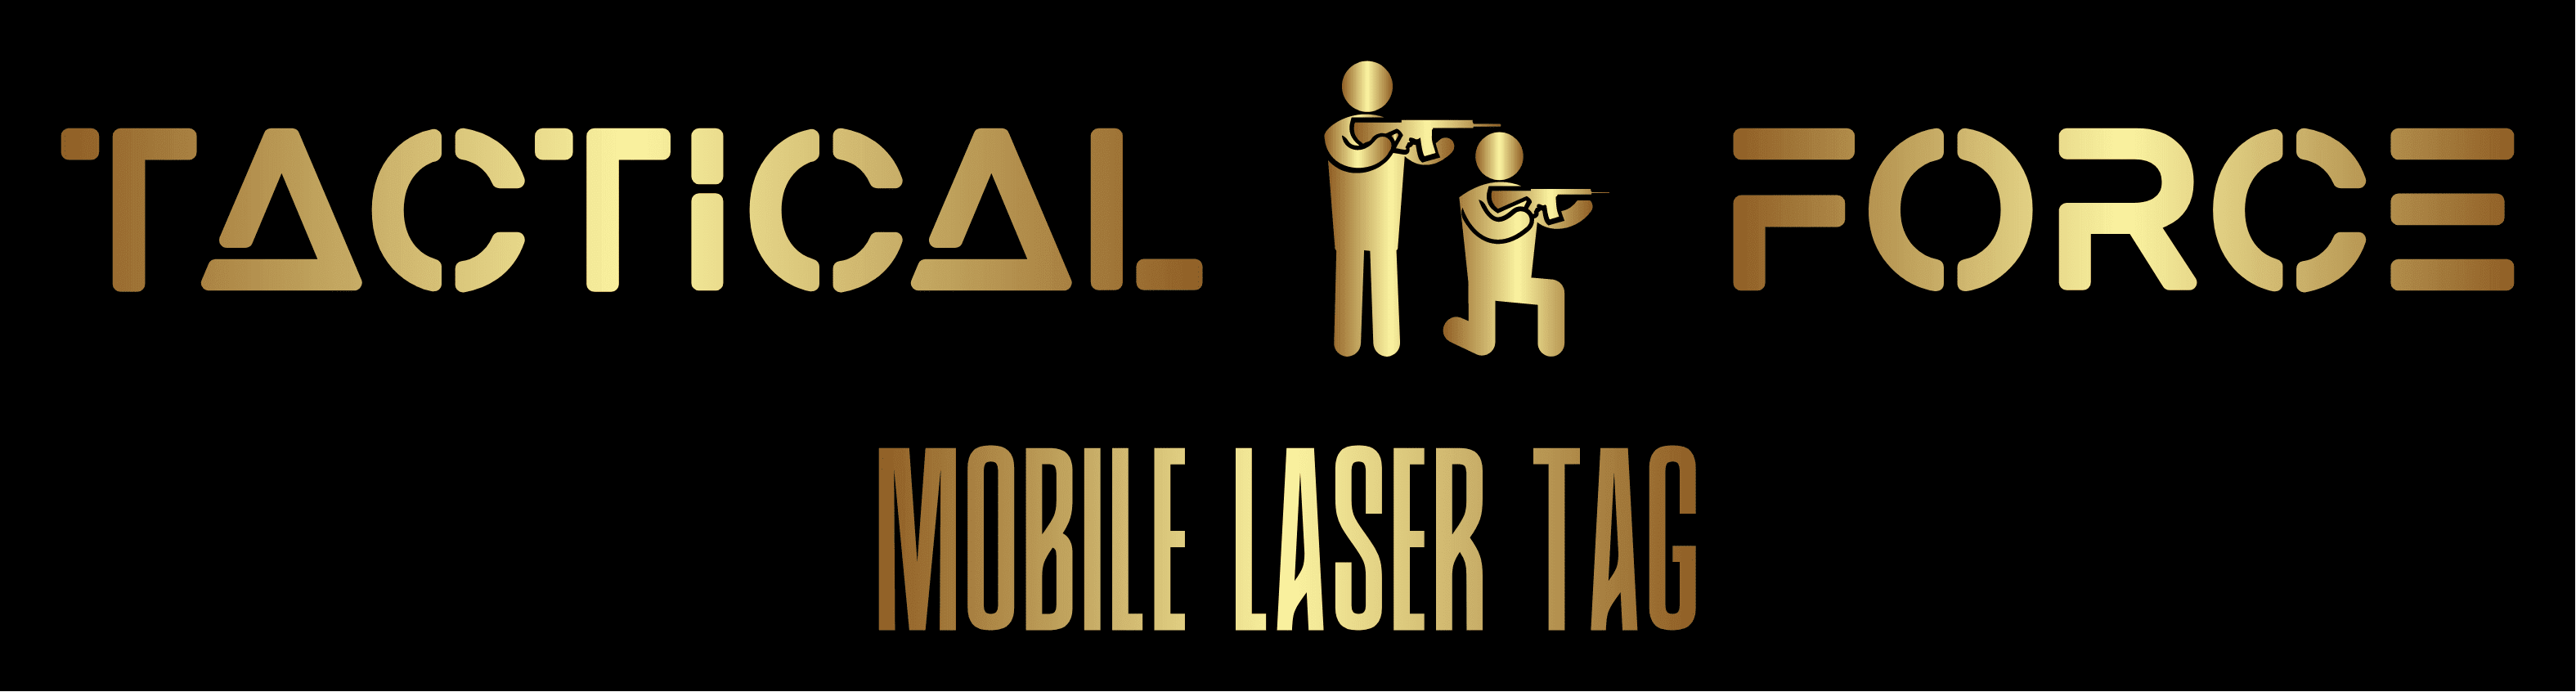 Tactical Force Mobile Laser Tag